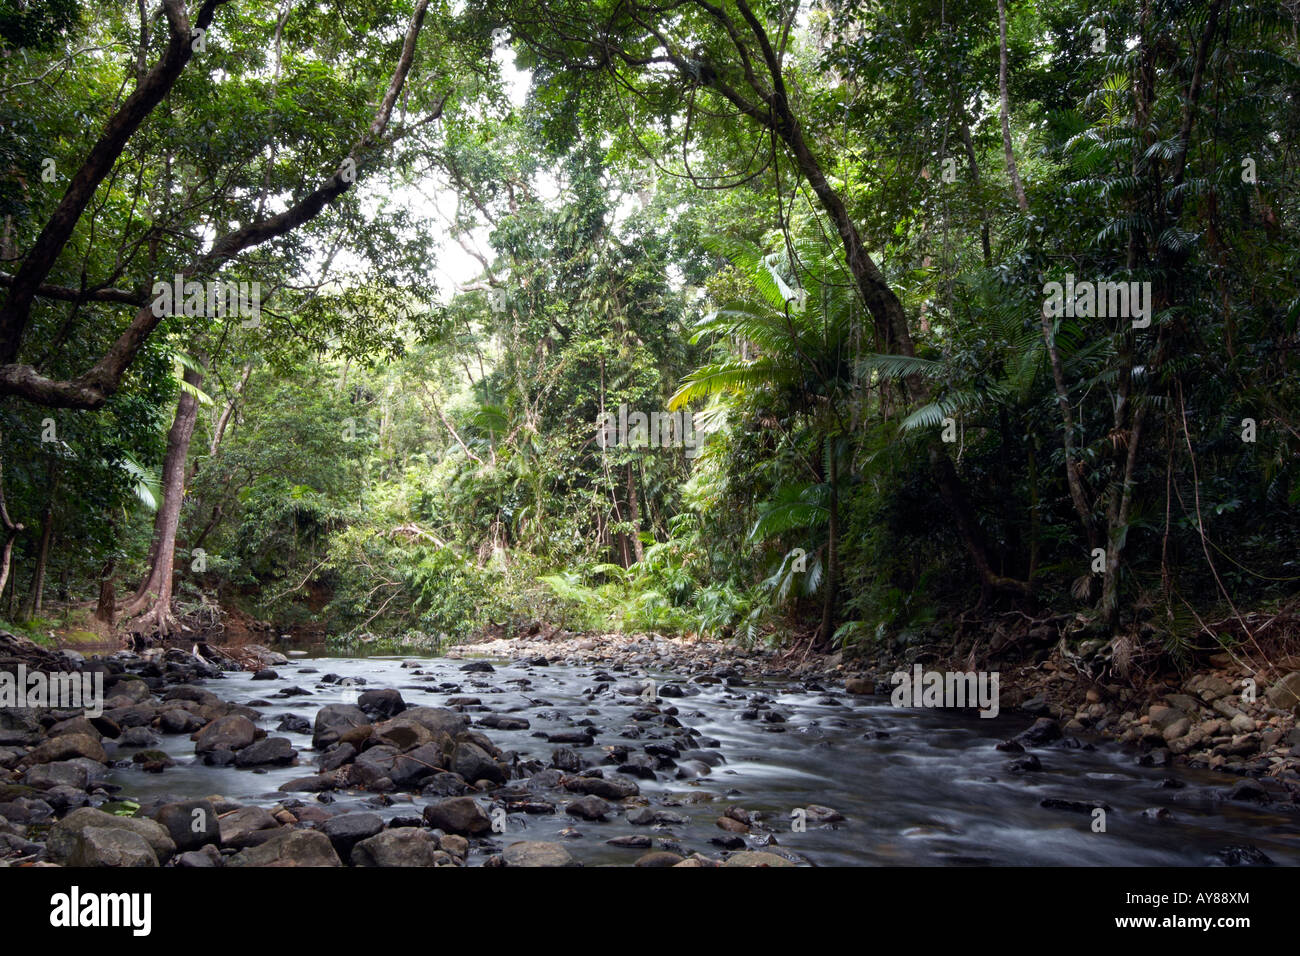 Luxurious vegetation and running water in UNESCO-protected Daintree Rainforest, Far North Queensland, Australia Stock Photo